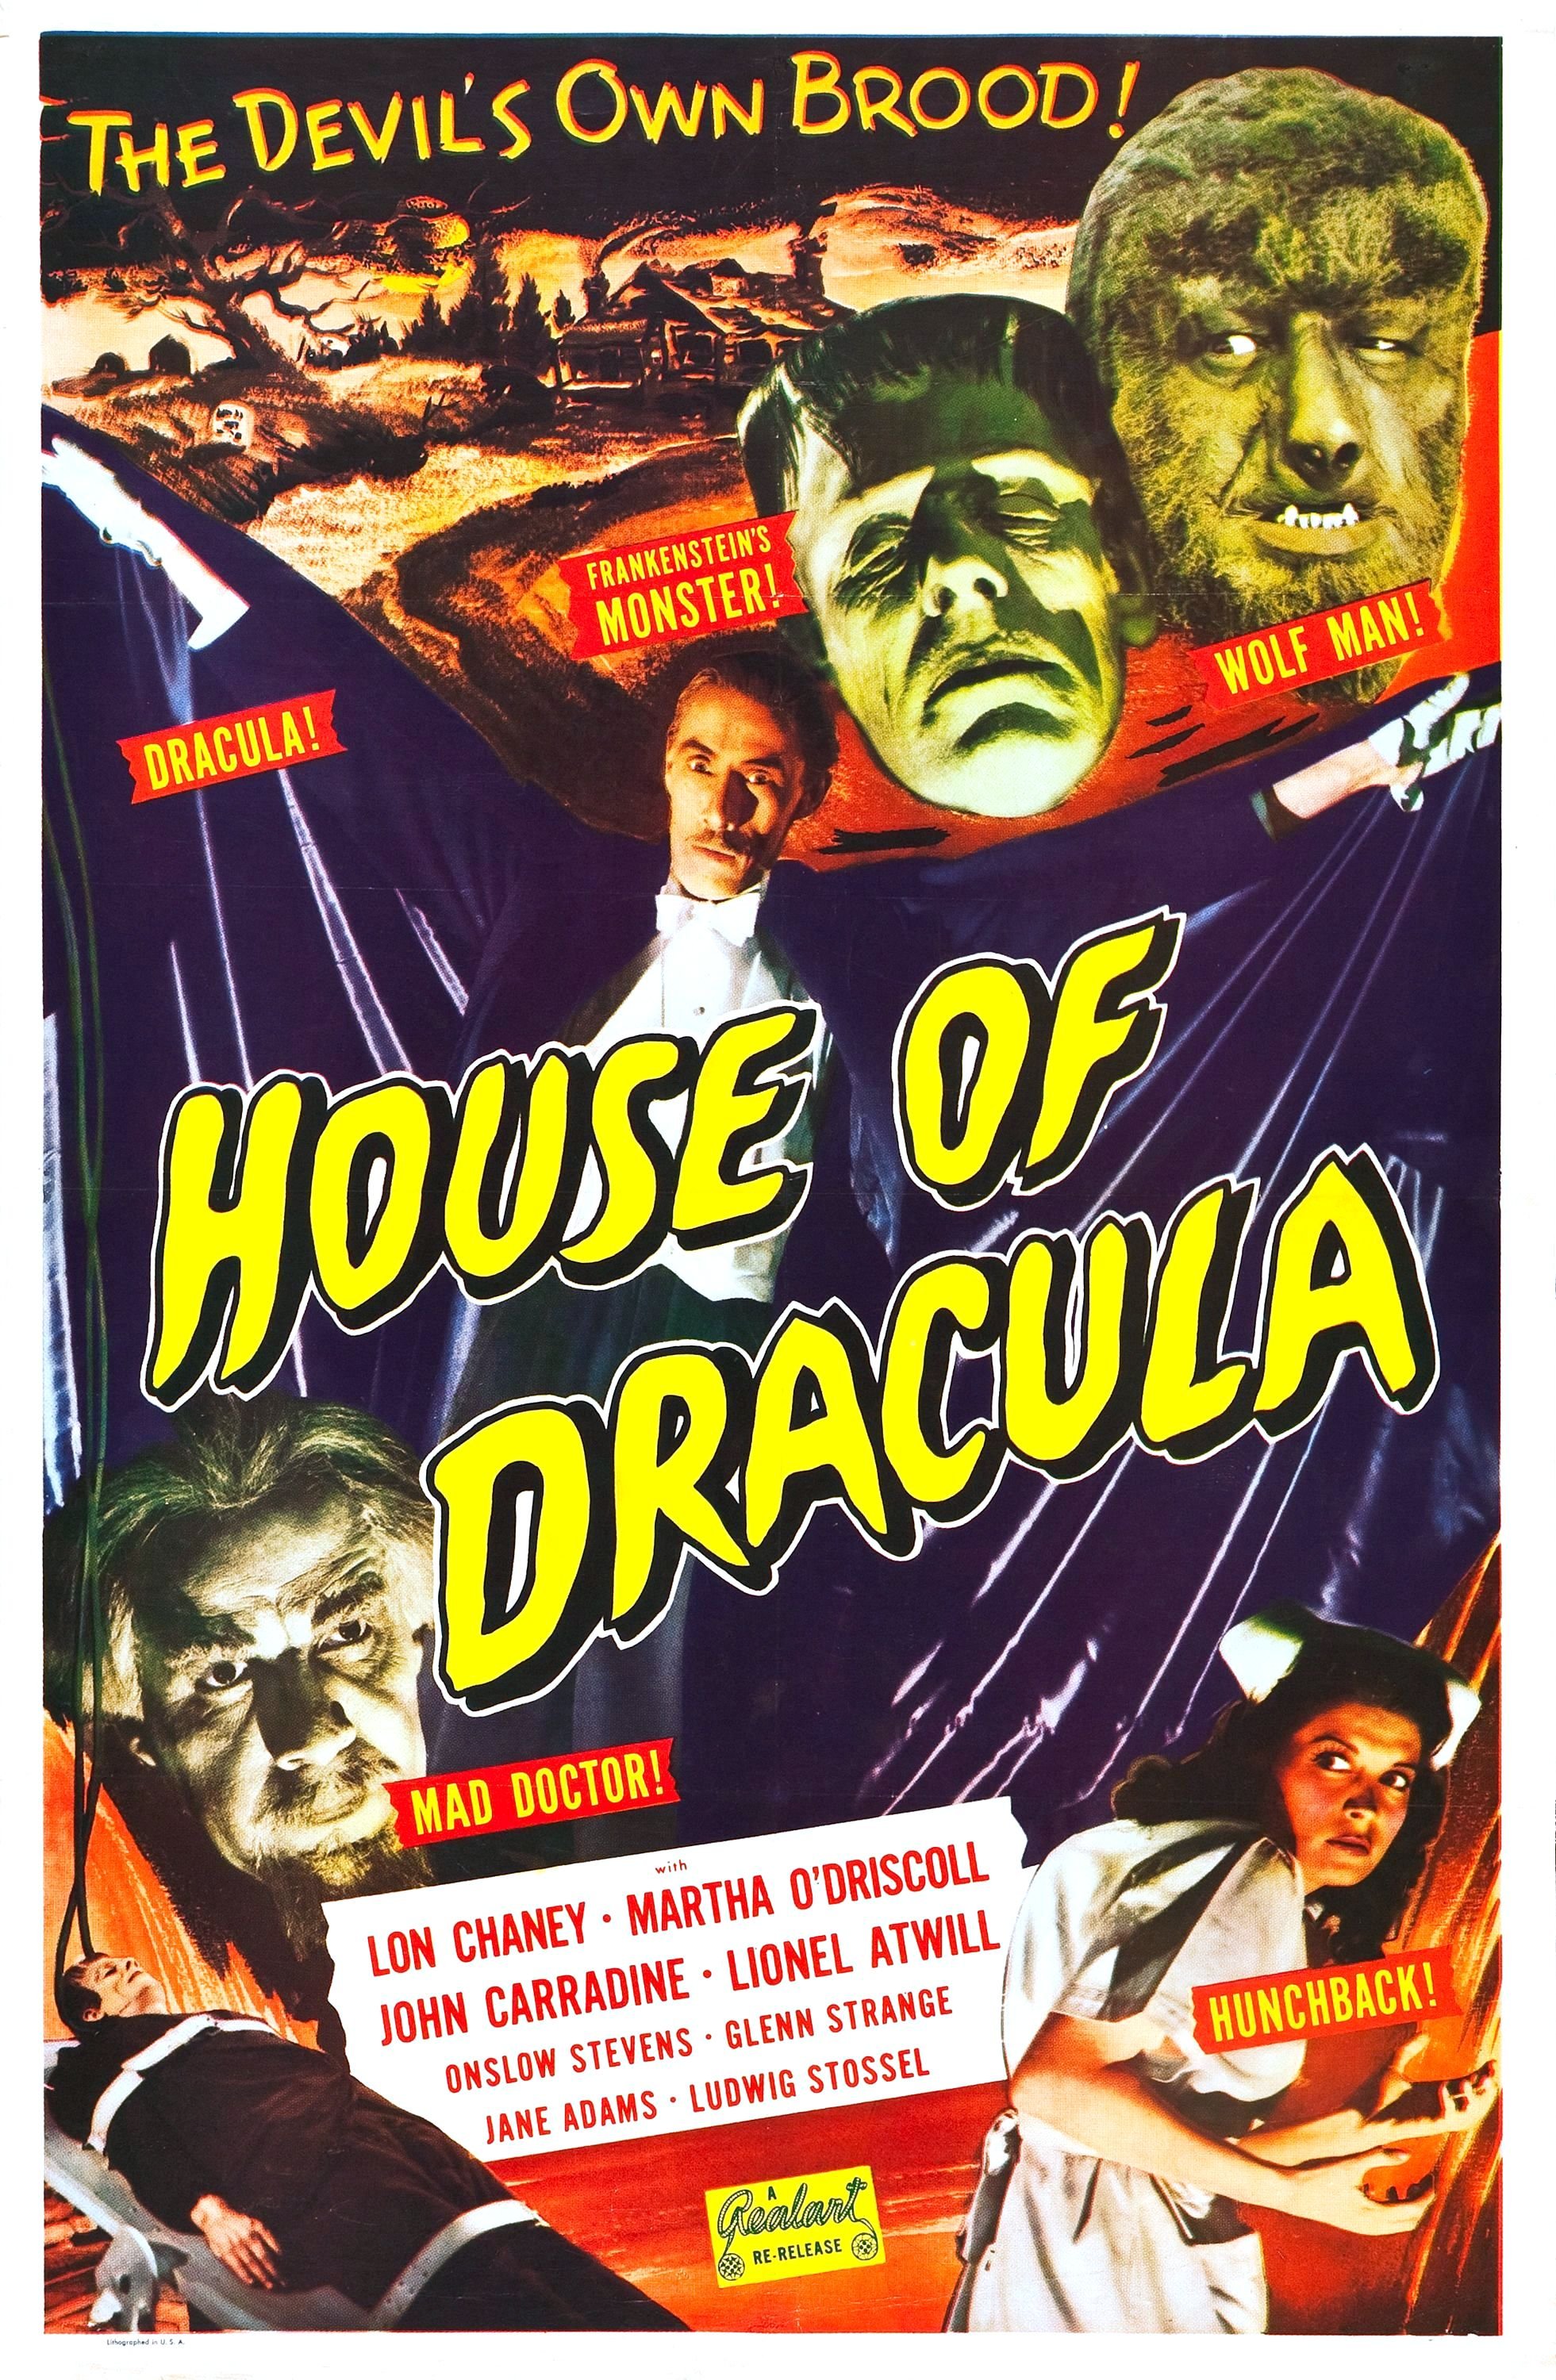 Poster of the movie House of Dracula